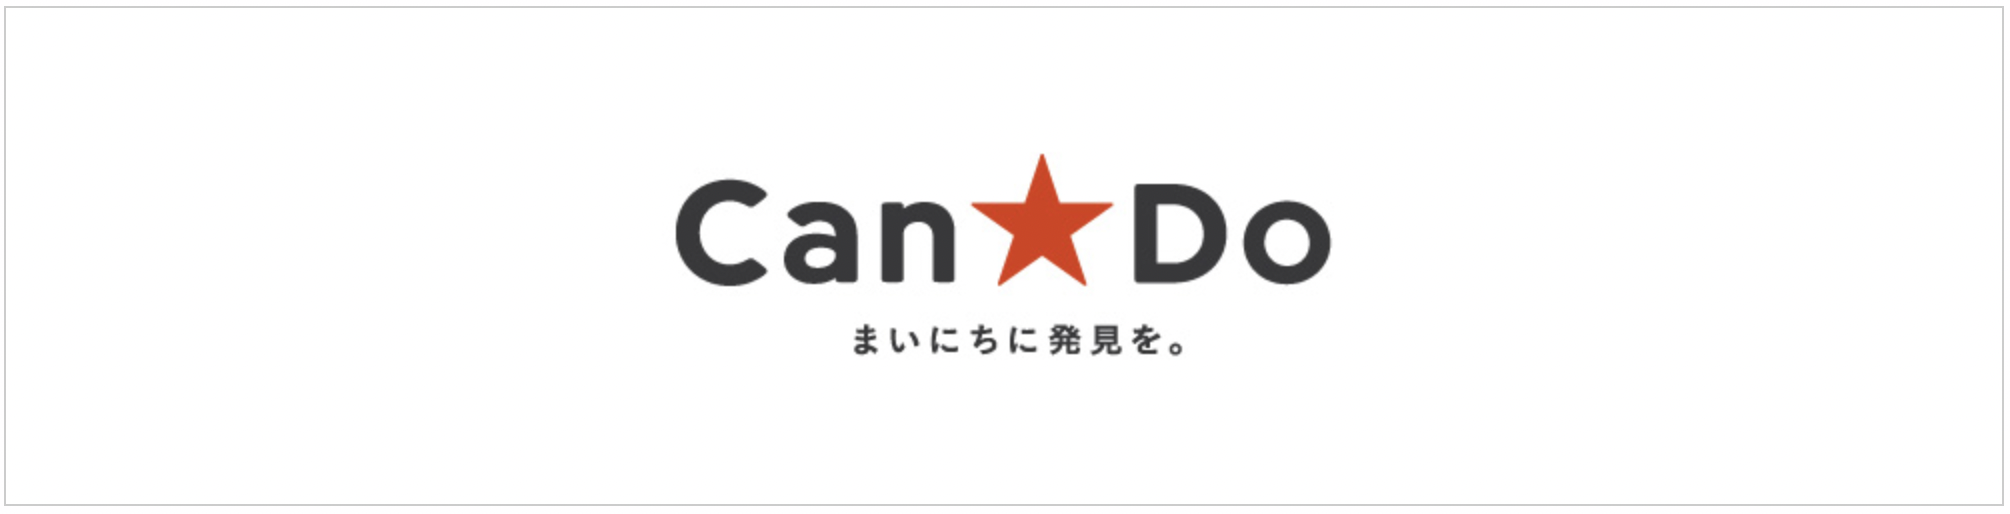 Can★Doロゴ画像